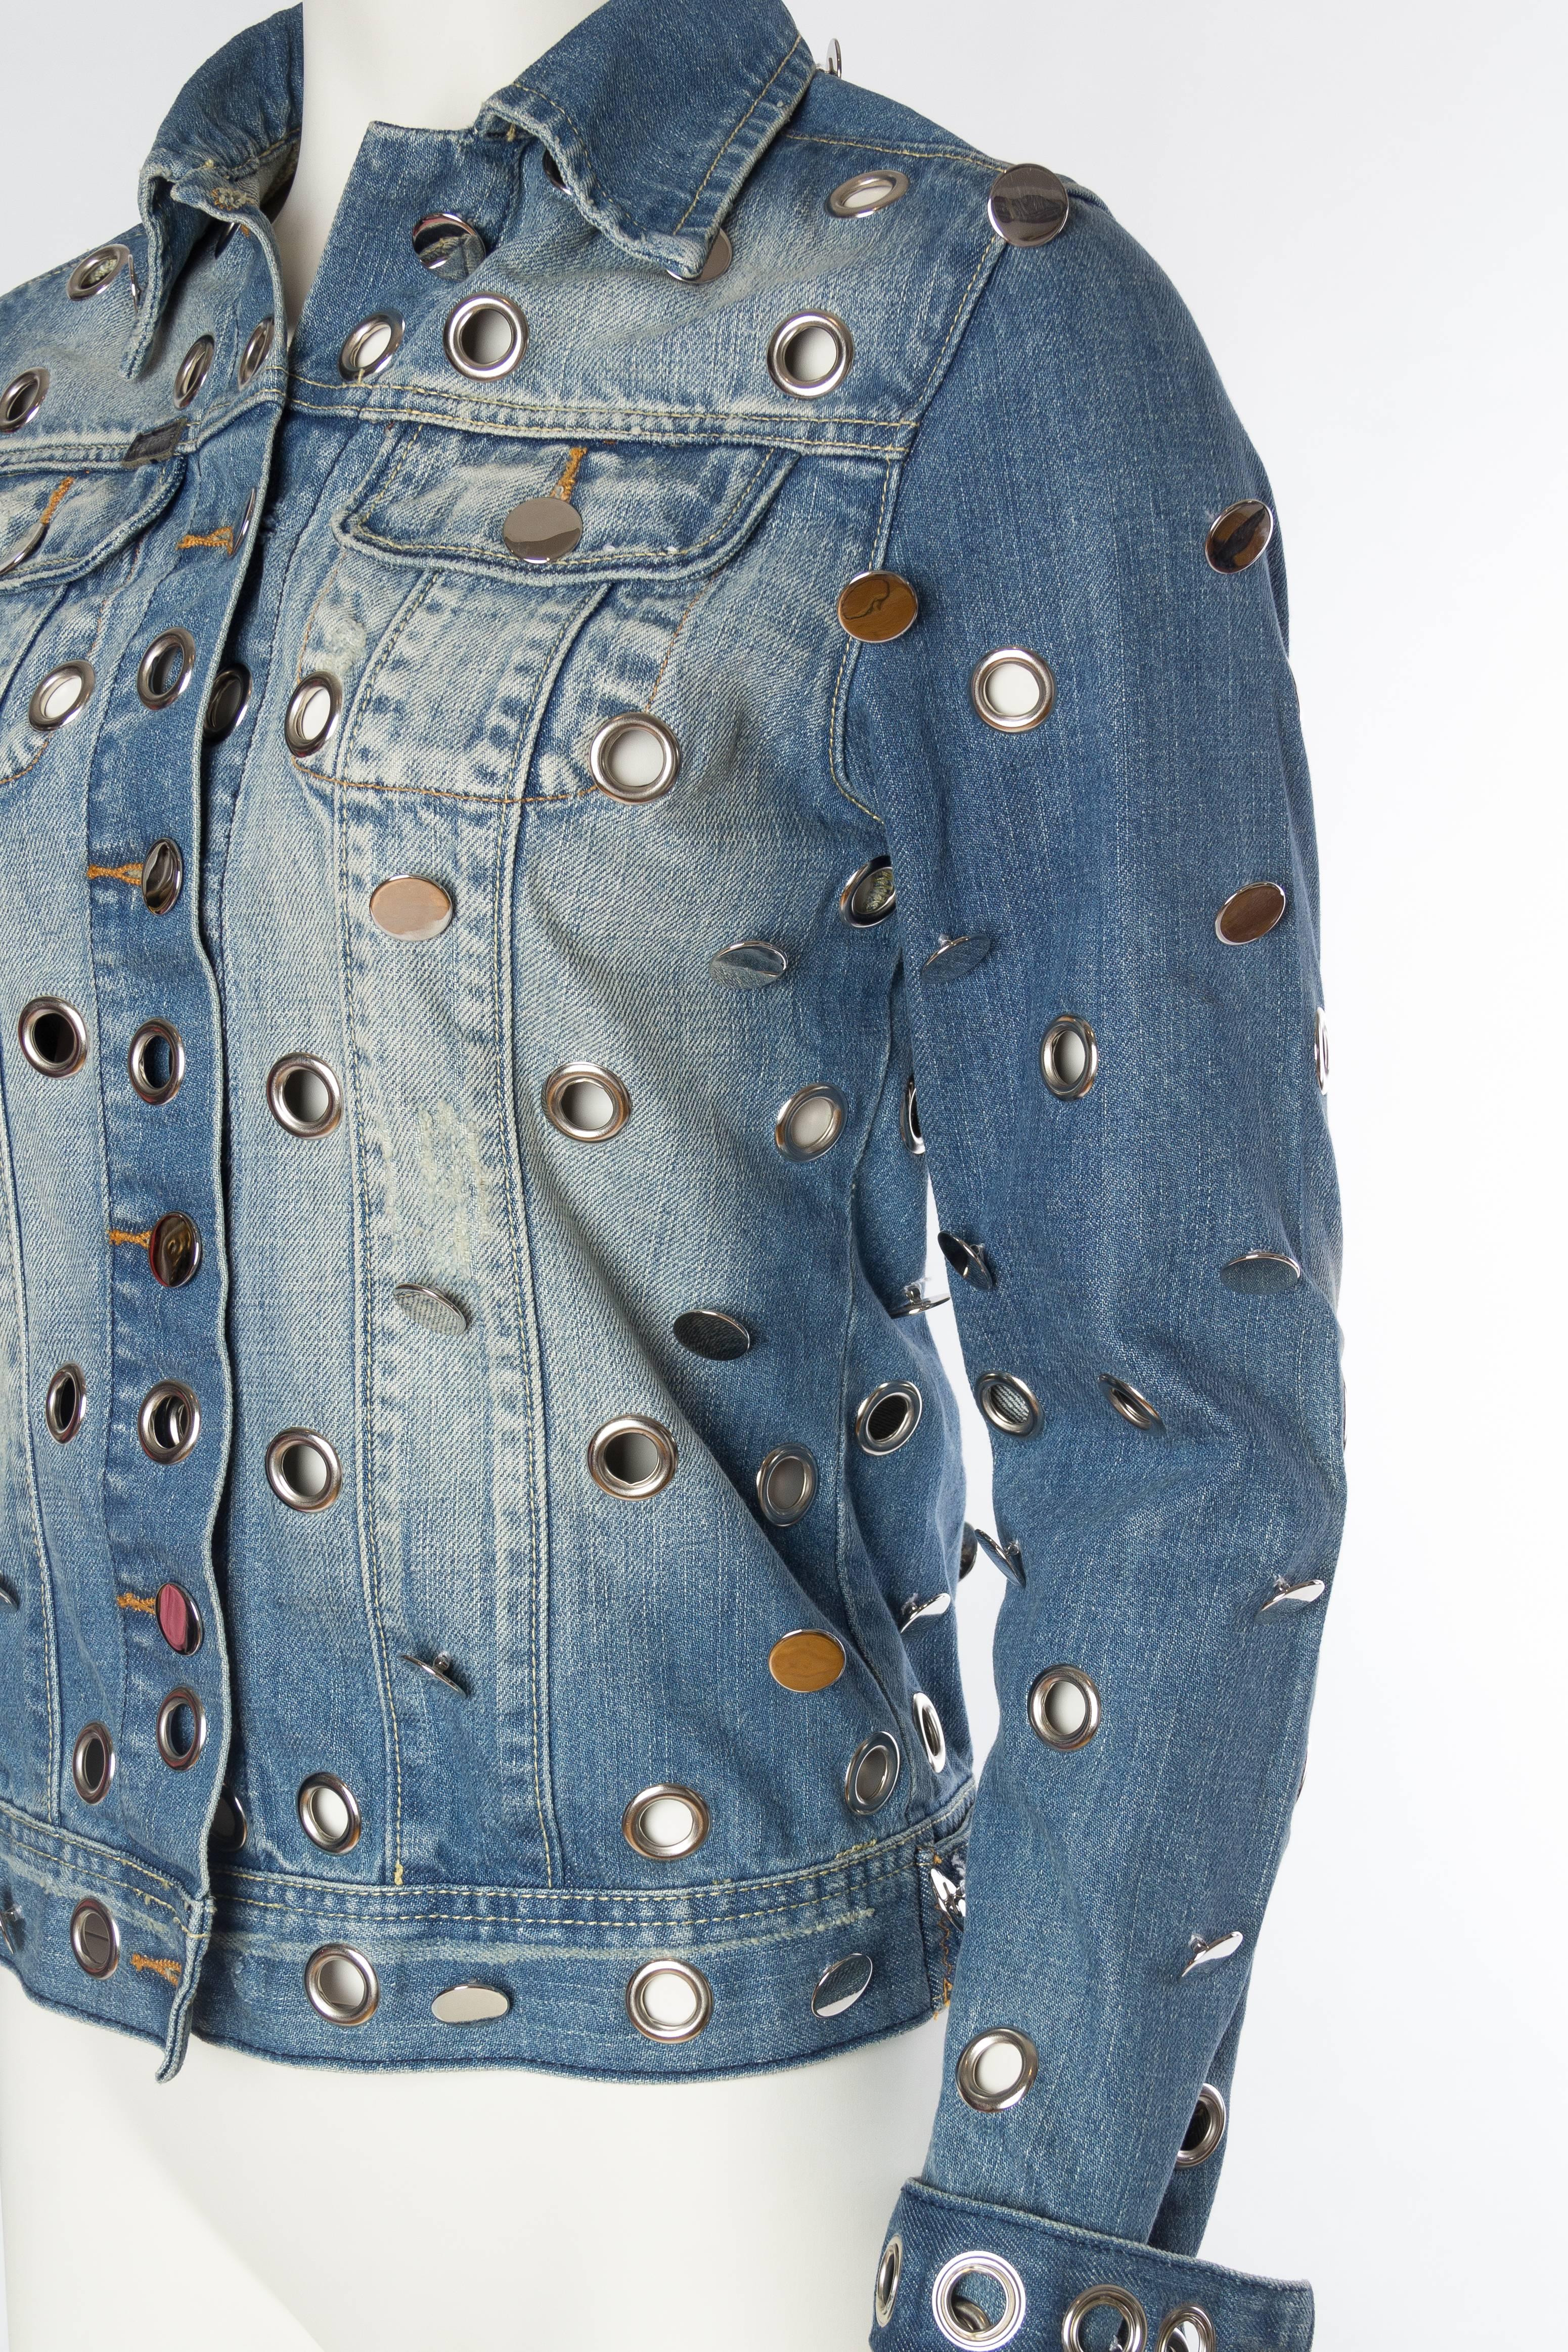 Denim Jacket Covered in Mirrored Buttons and Gromets 4